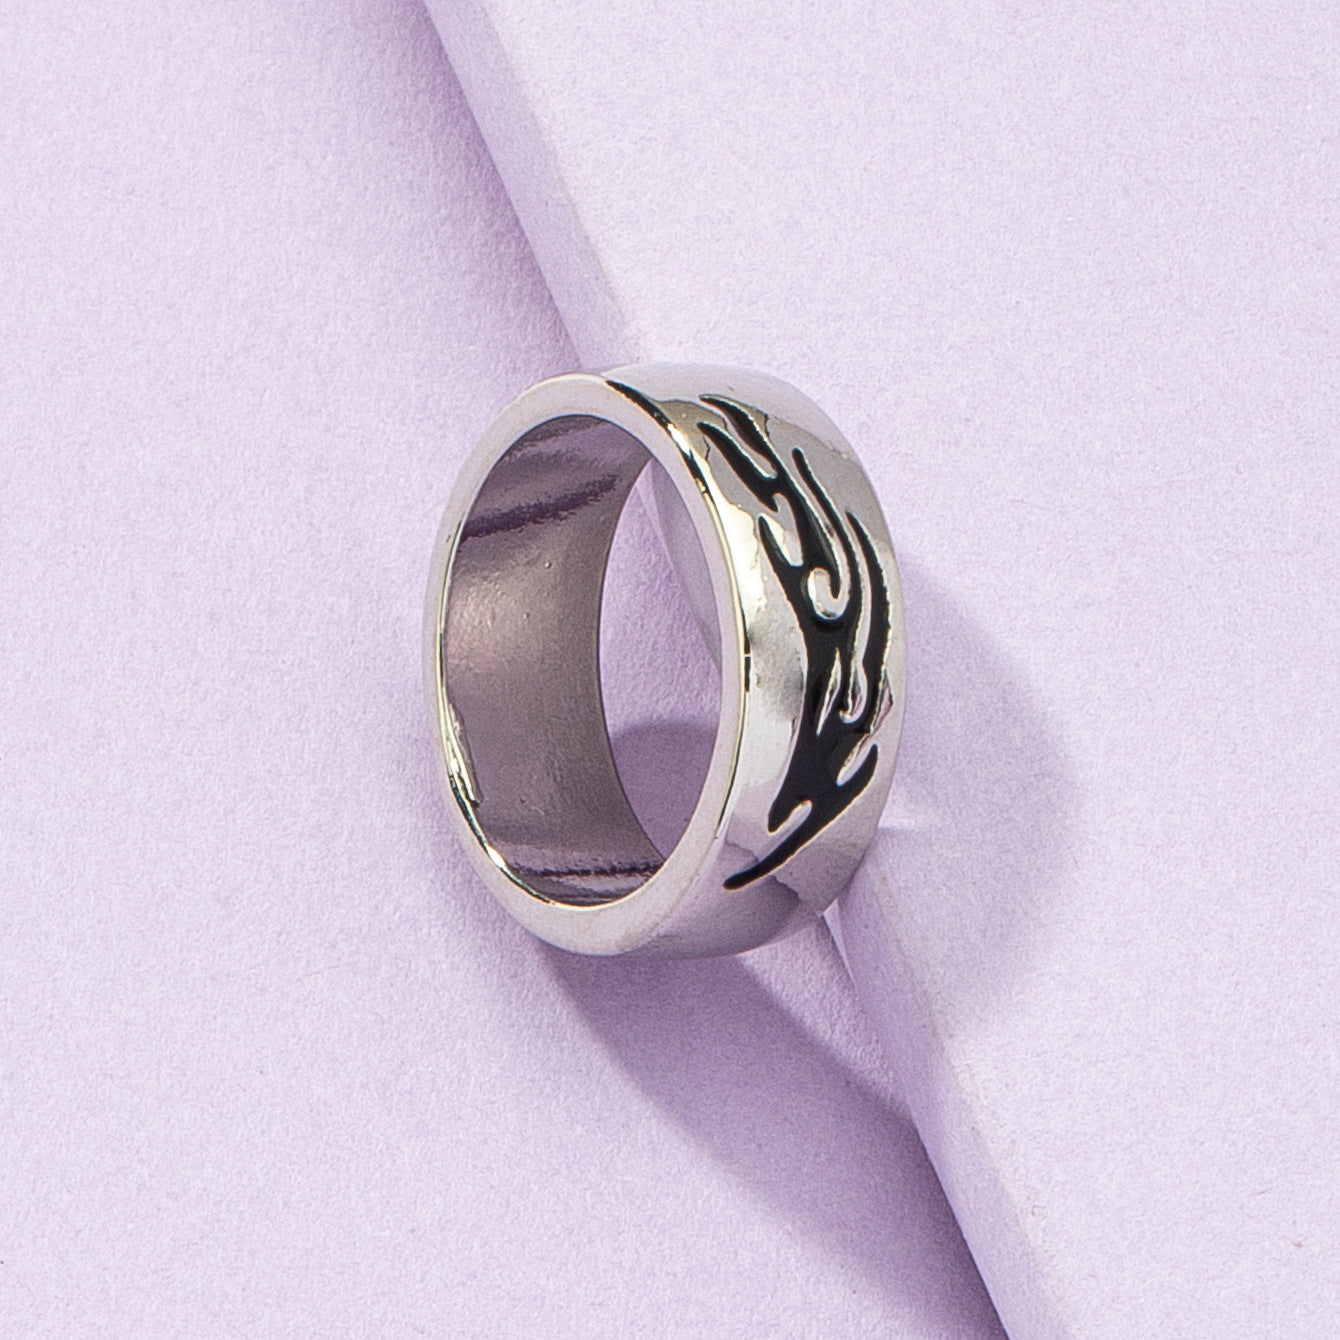 Flame Ring with Stylish Vienna Verve Design